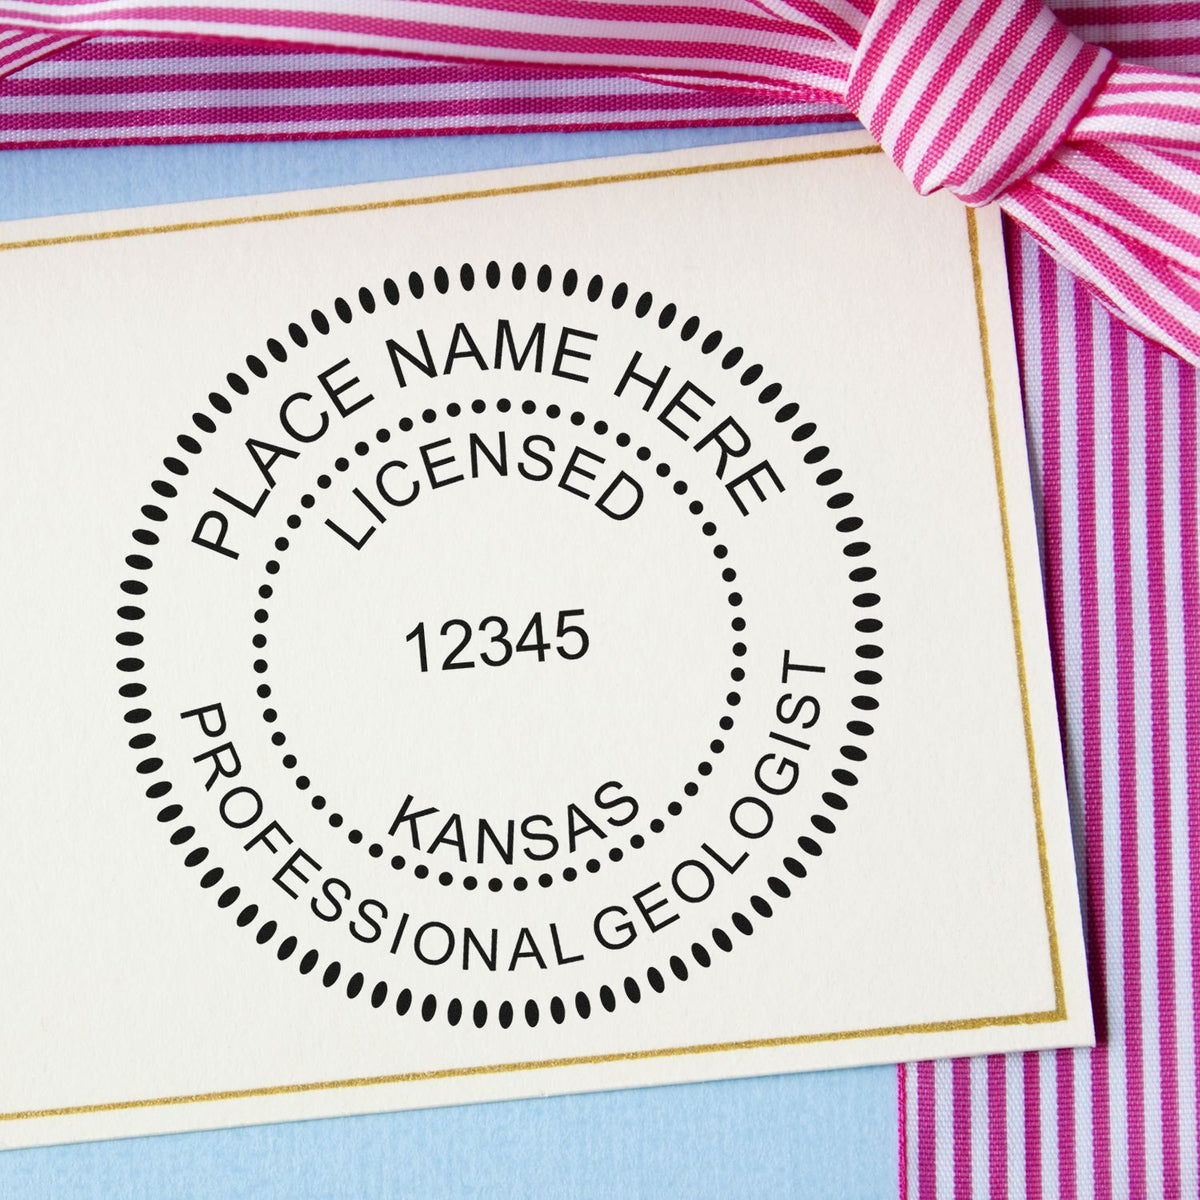 A photograph of the Slim Pre-Inked Kansas Professional Geologist Seal Stamp  impression reveals a vivid, professional image of the on paper.